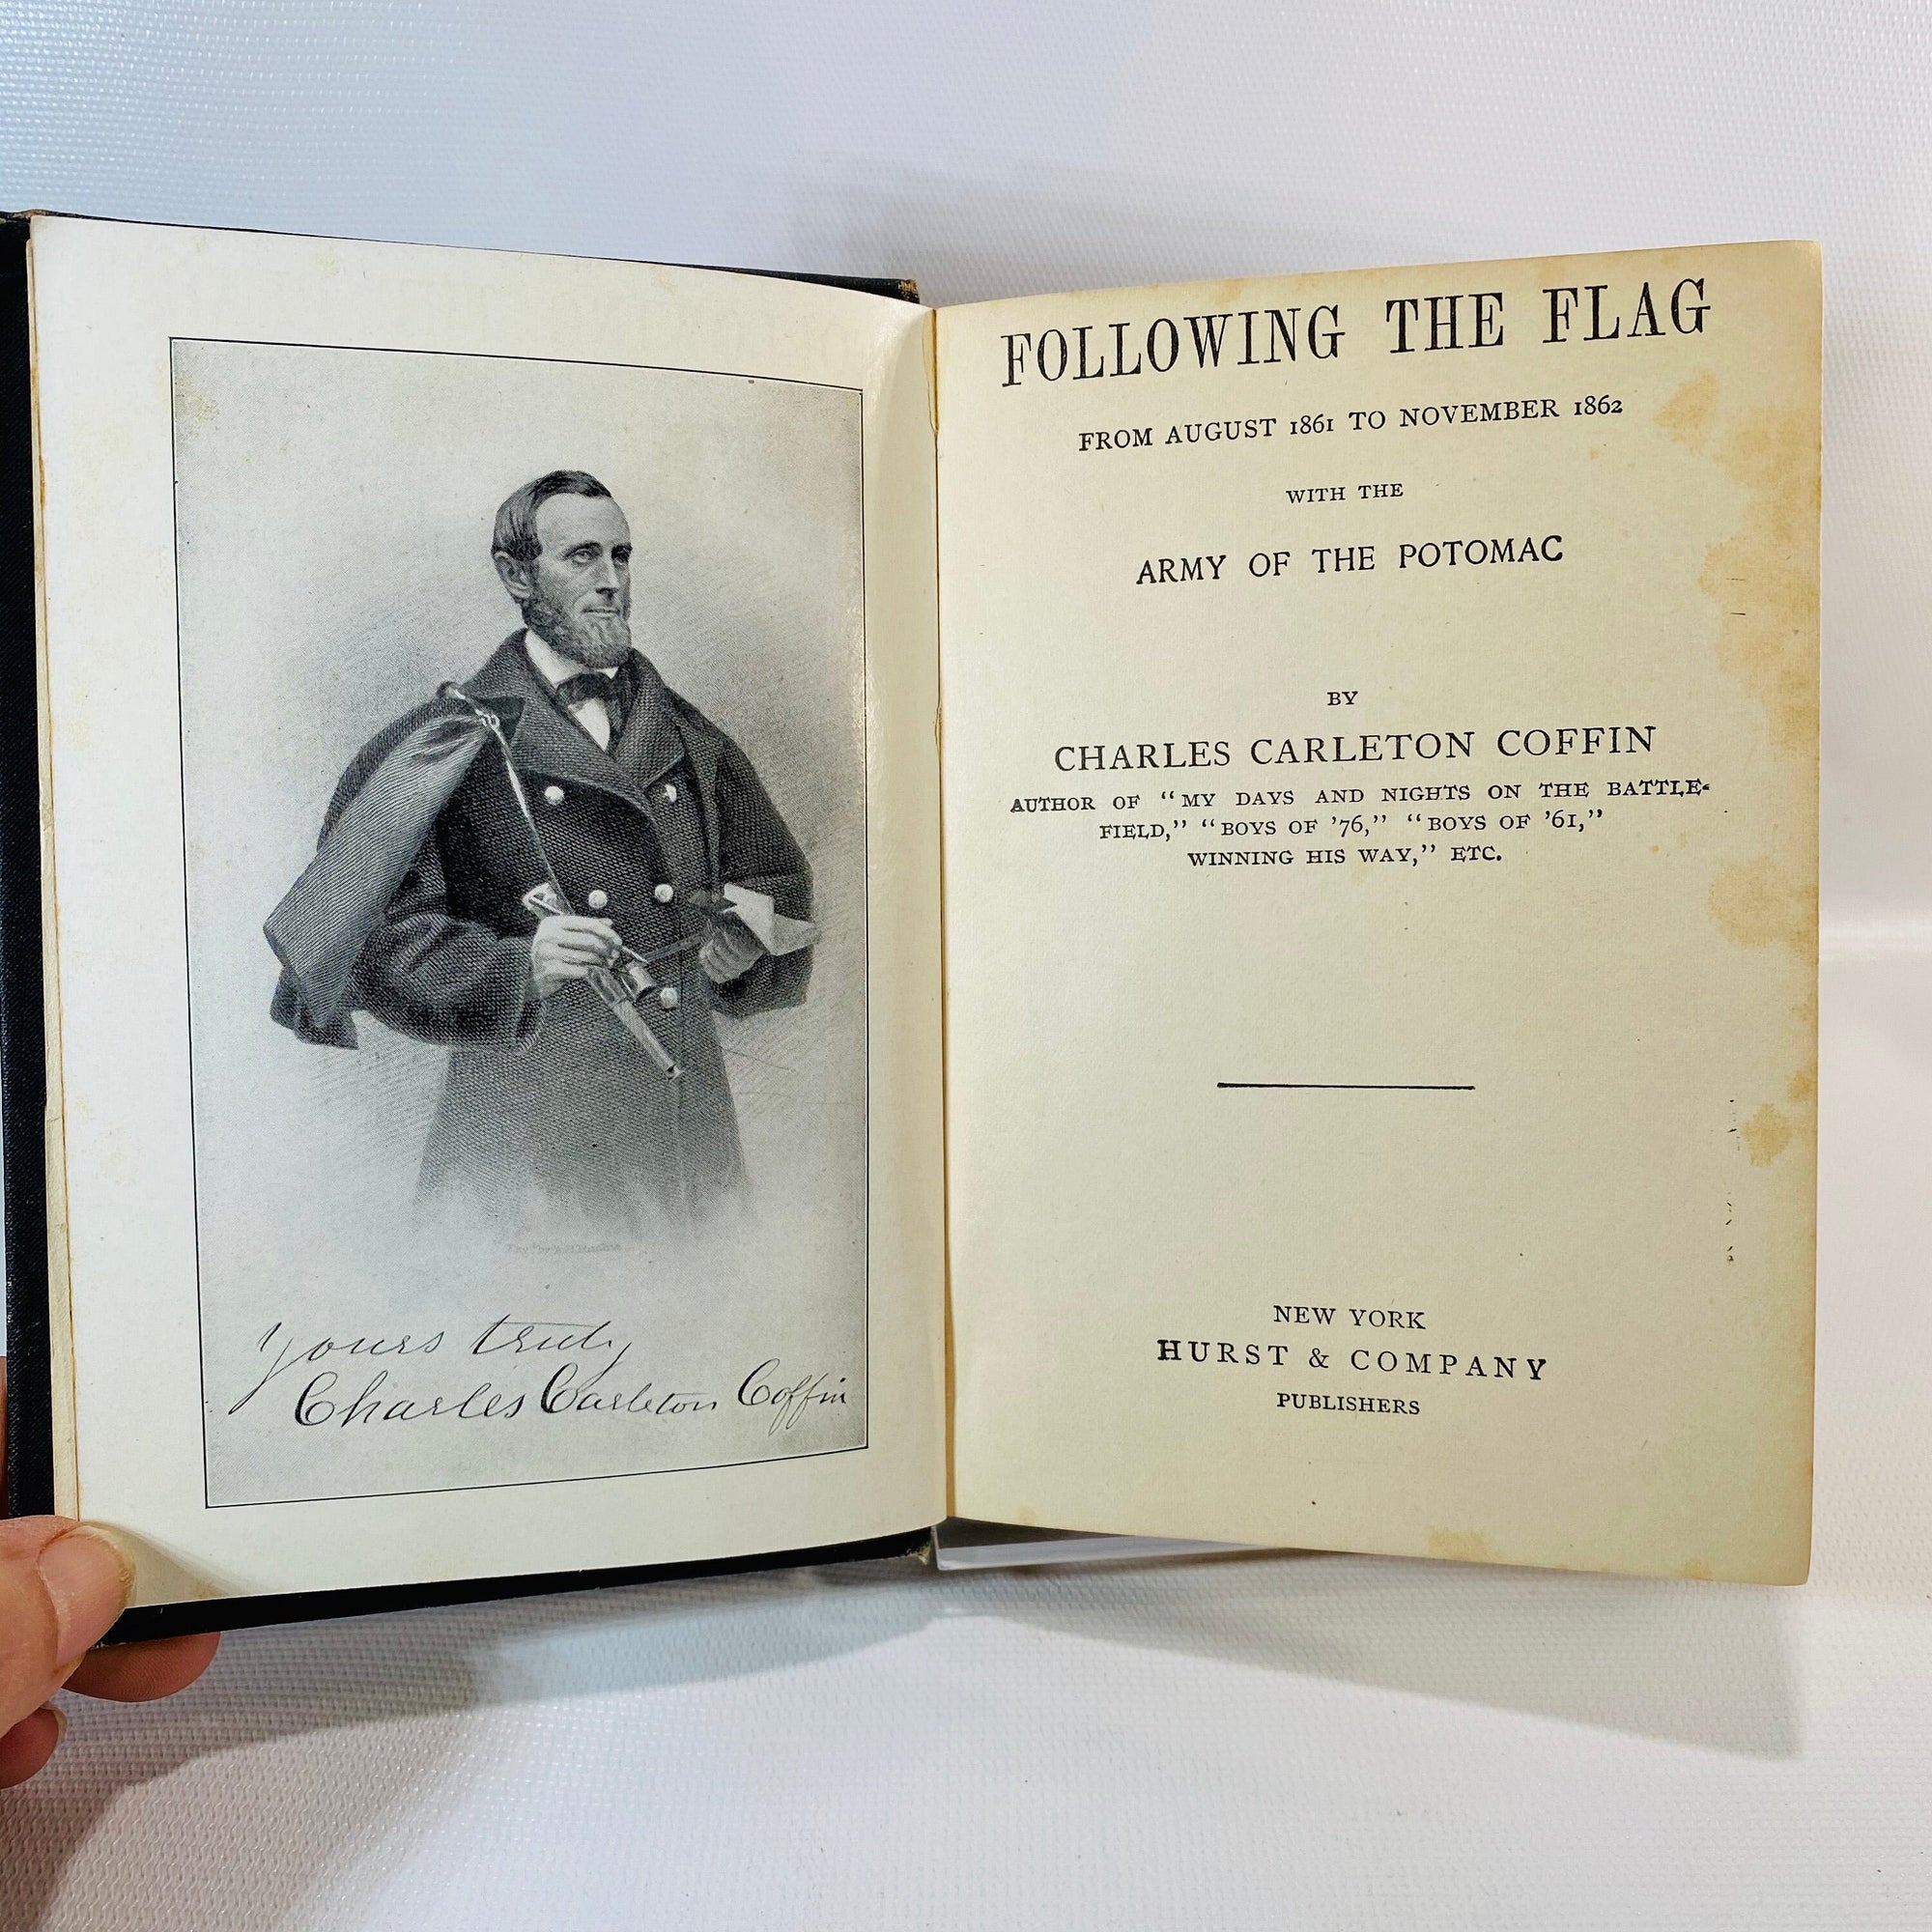 Following the Flag by Charles Carleton Coffin Published by Hurst & Company Vintage Book